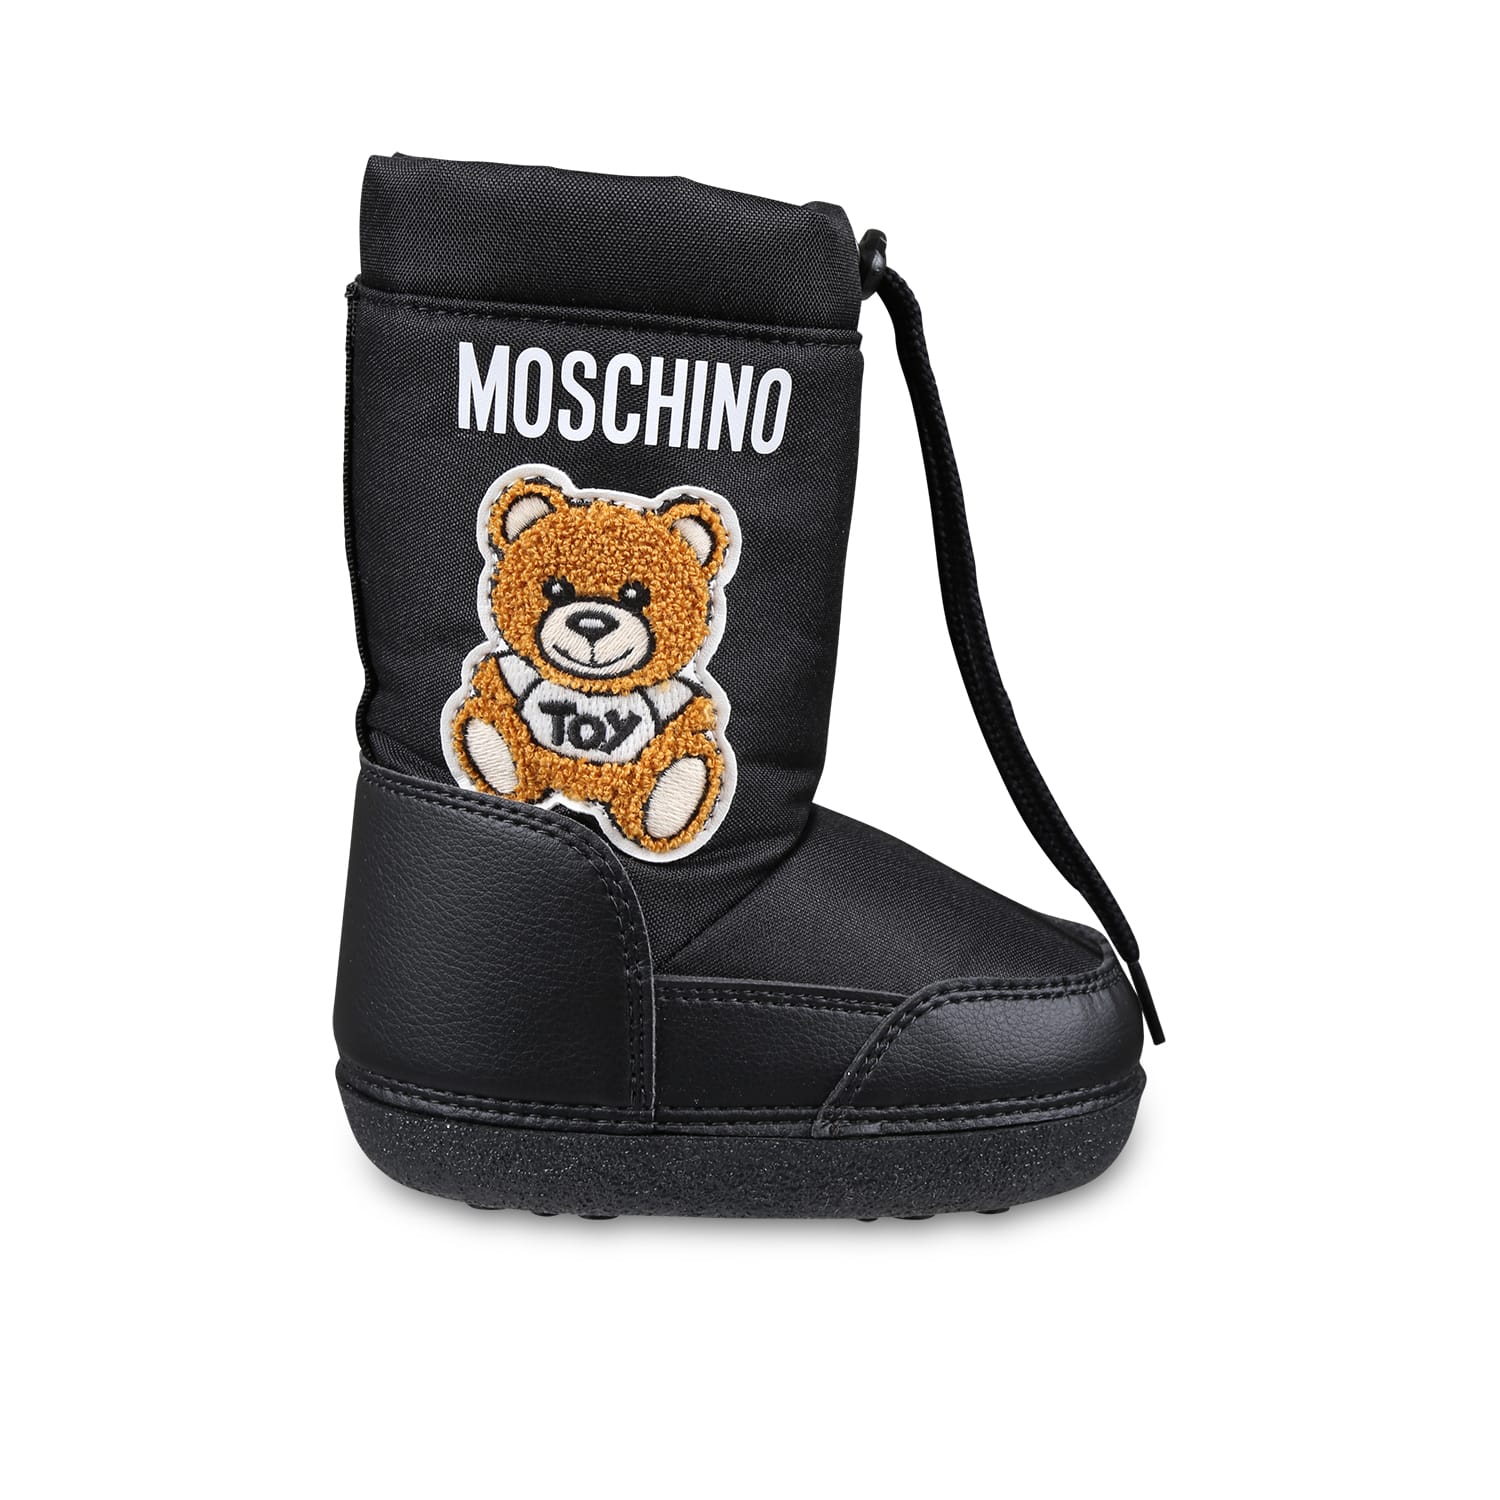 Moschino Black Snow Boots For Kids With Teddy Bear